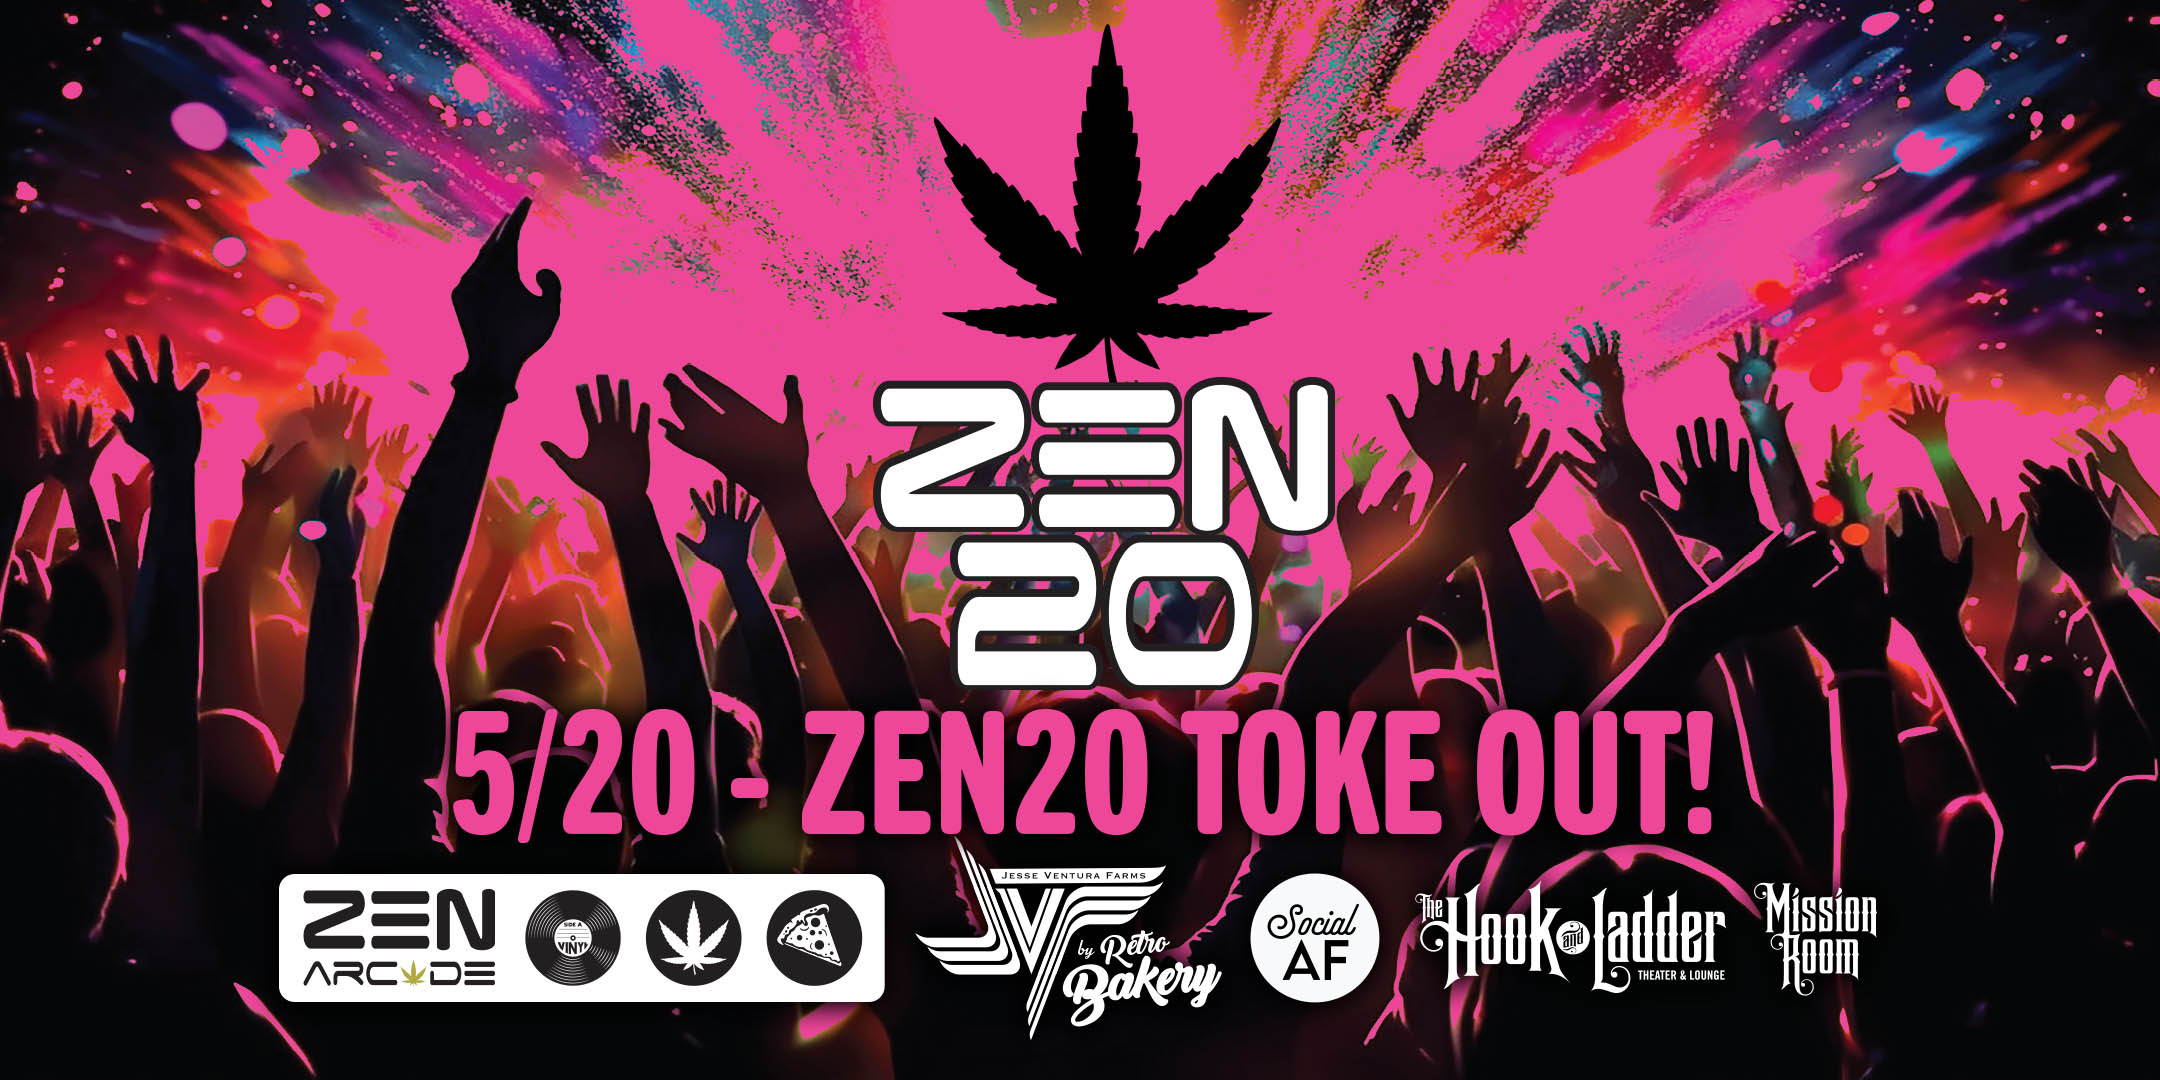 Monday, May 20th - Zen20 Toke Out! Monday evening 'Toke Out' Under The Canopy with Stoner Playlist and Social AF Stoner Bingo! Hook and Ladder Theater / Mission Room / Zen Arcade Doors 4:20pm :: Games 6:30pm :: 21+ FREE